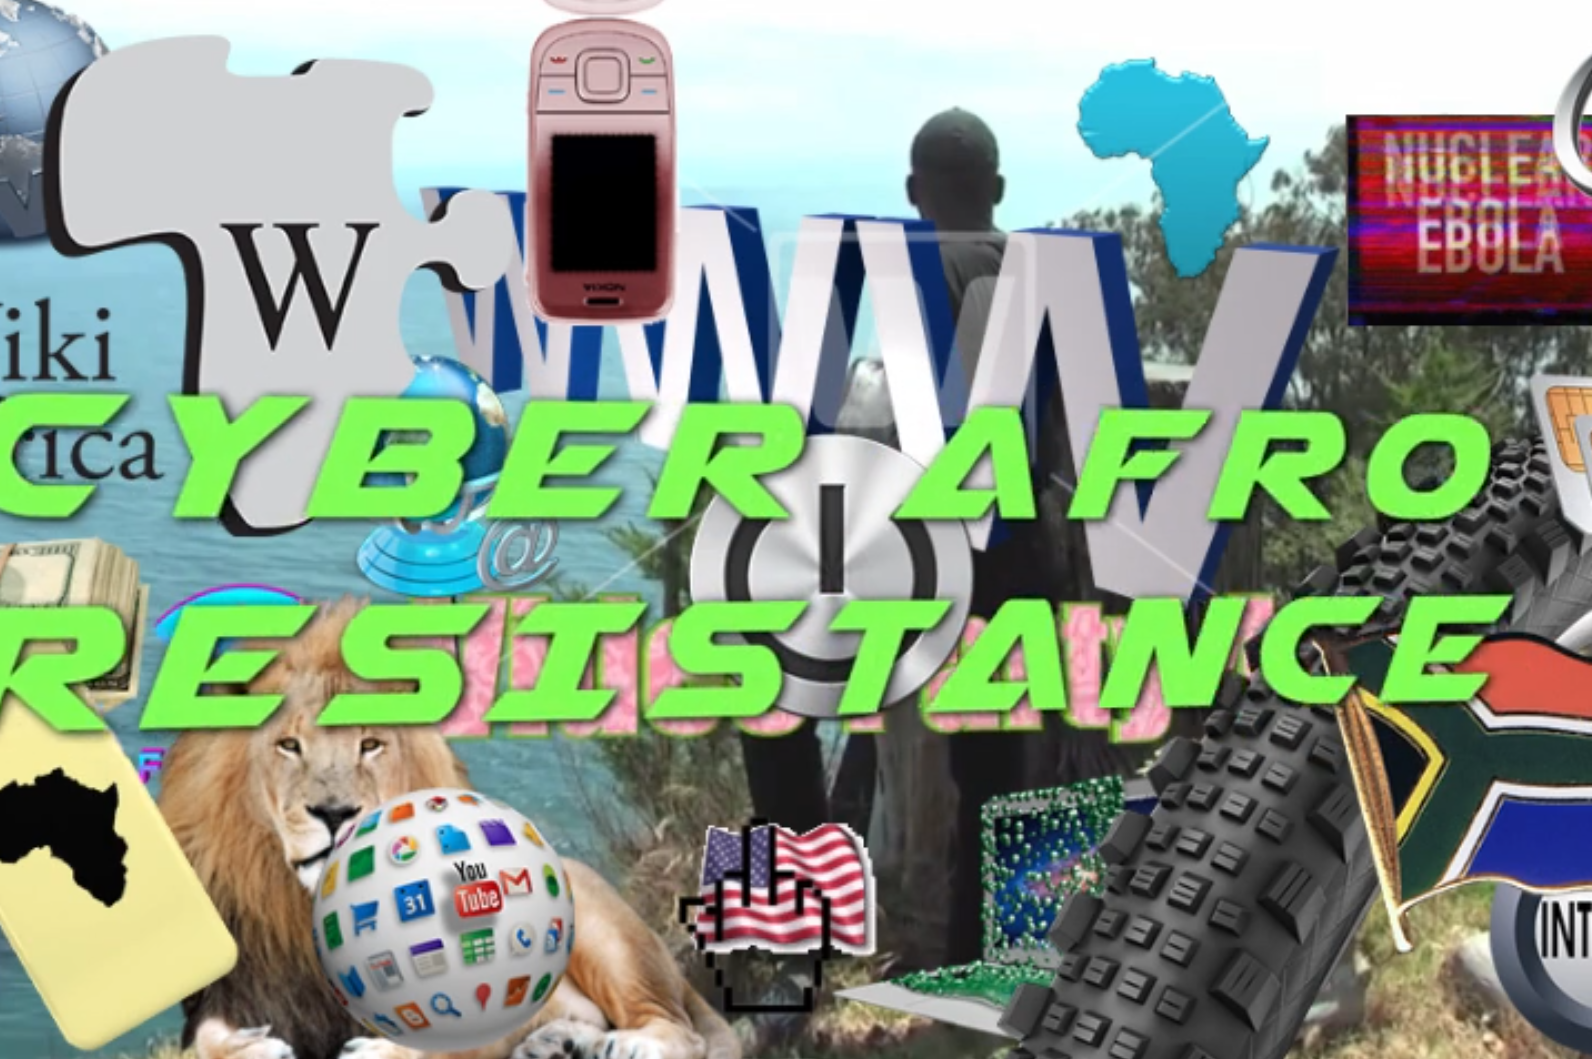 Video still with a collage of internet ephemera like the www or the wikipedia logo with Cyber Afro Resistance in large slanted green text on top